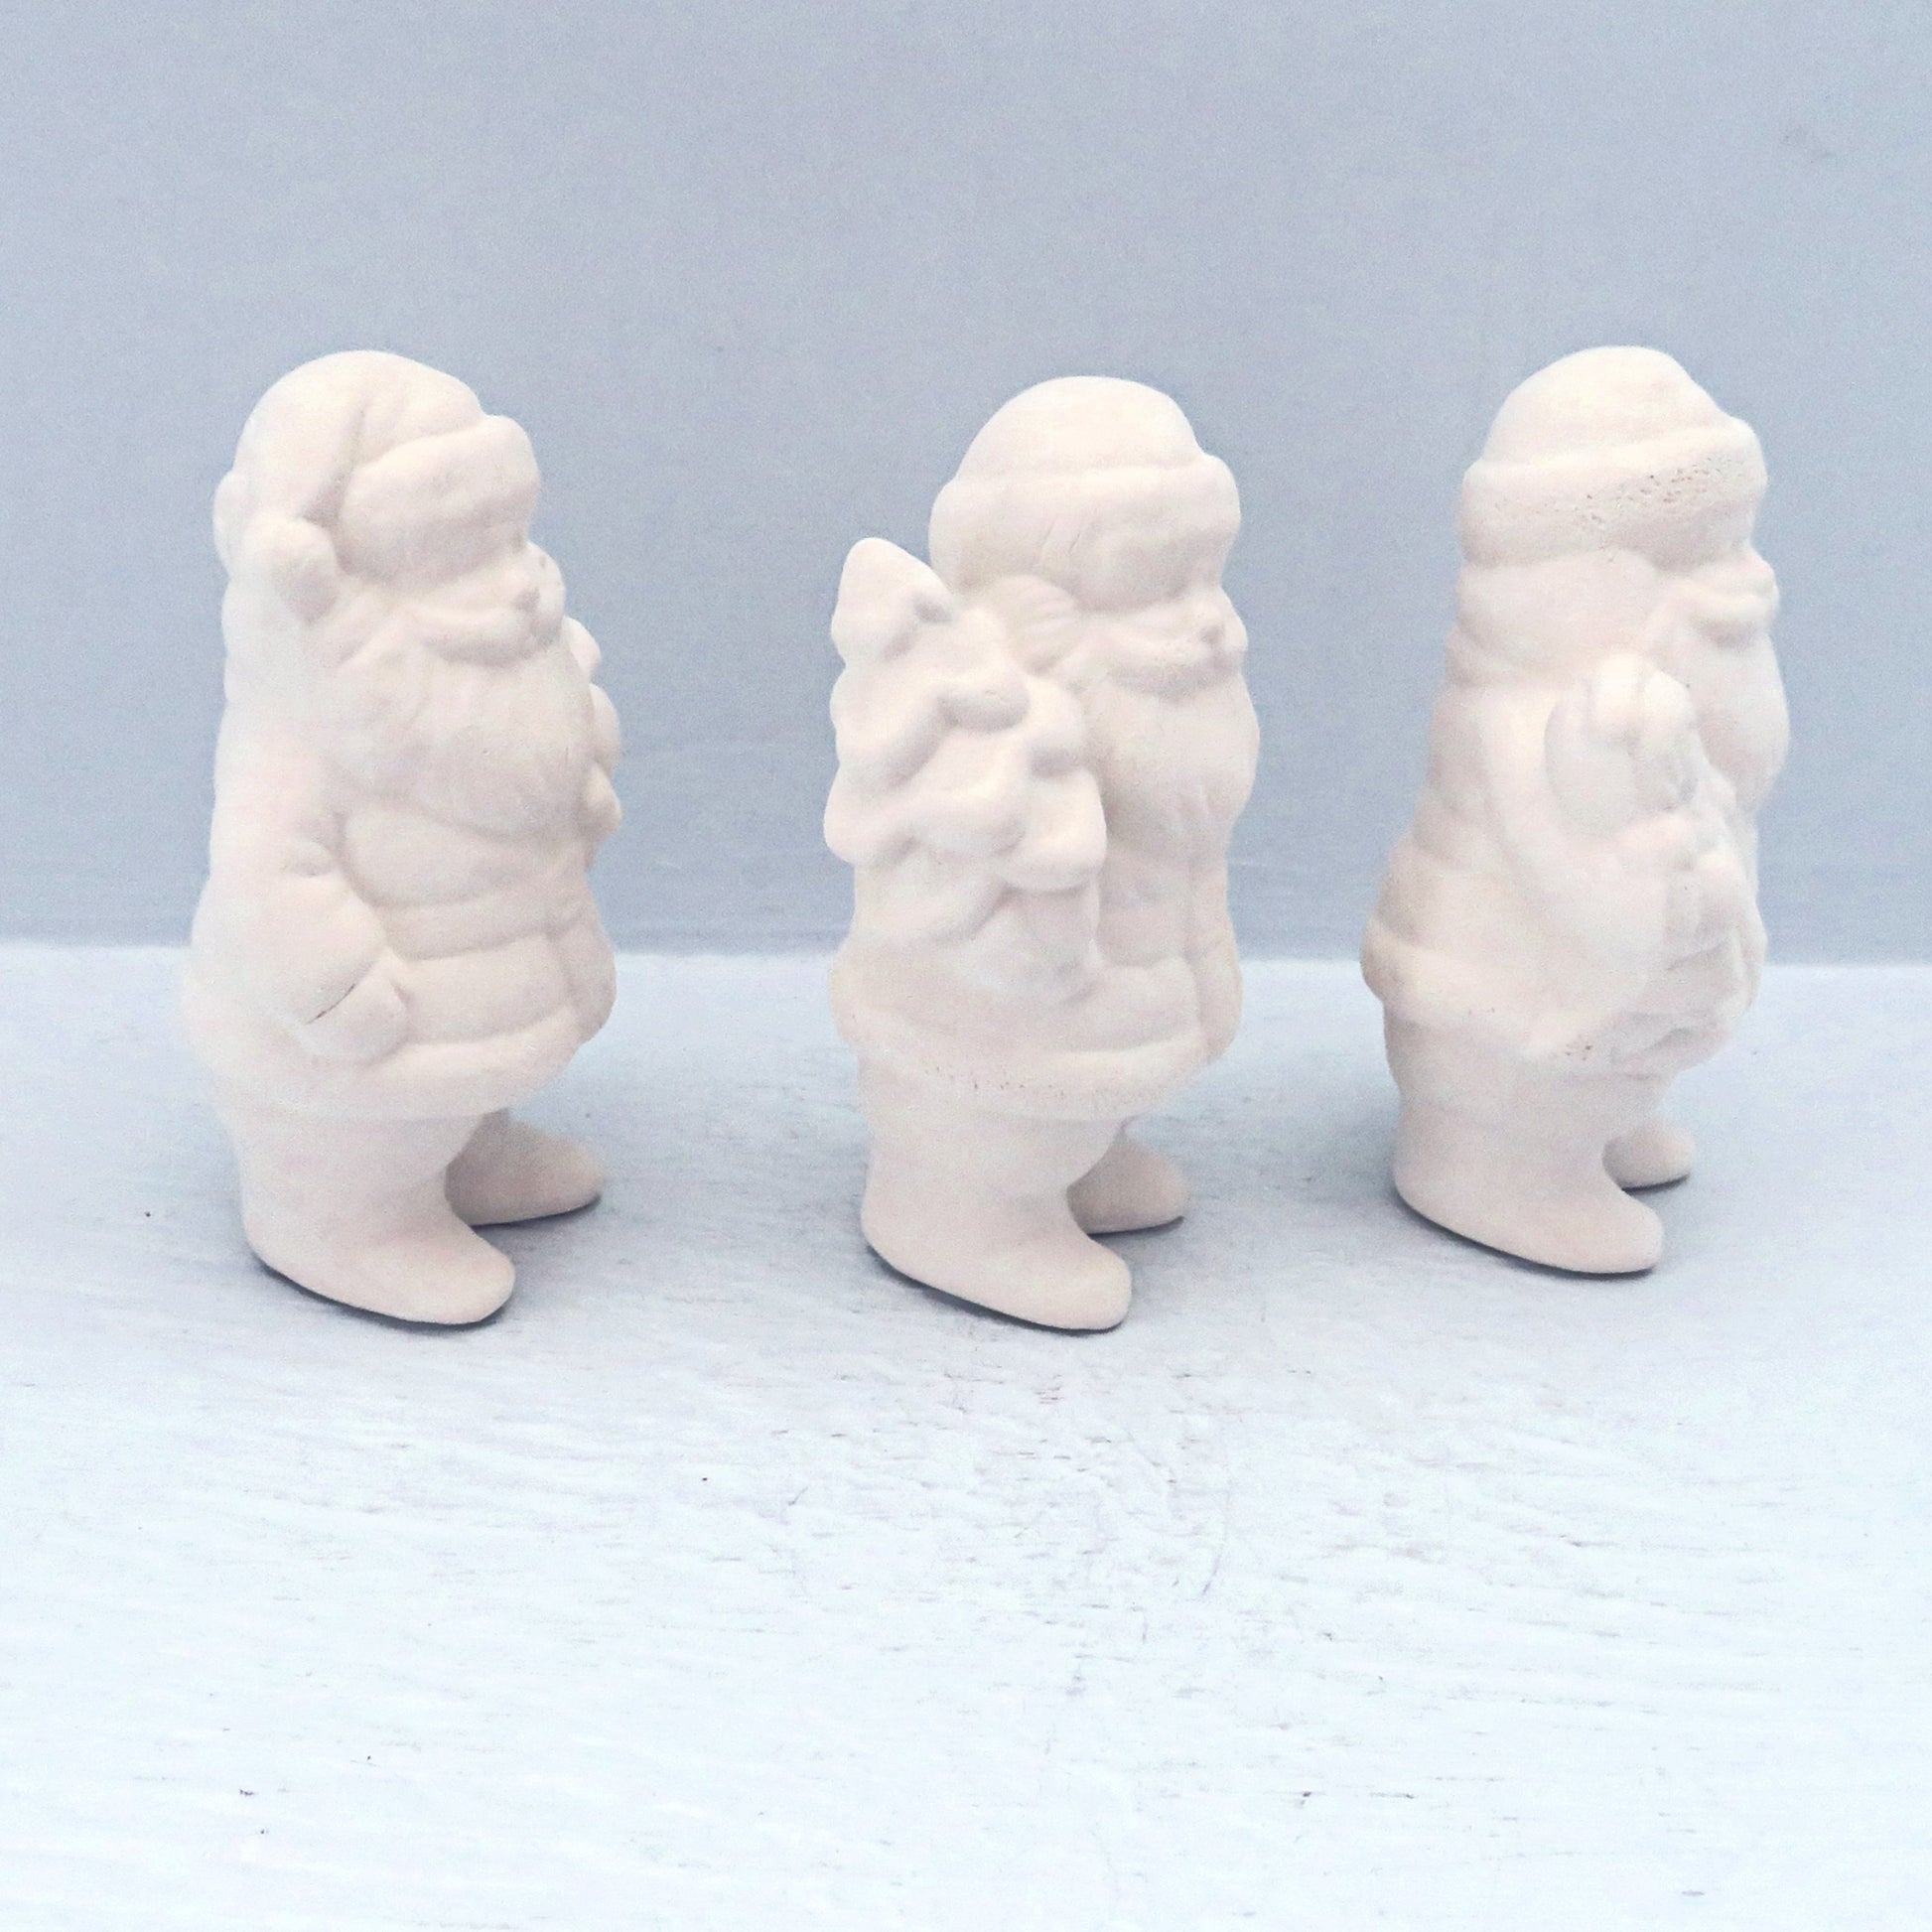 Side view with paintable ceramic Santa statues facing right on a pale blue surface.